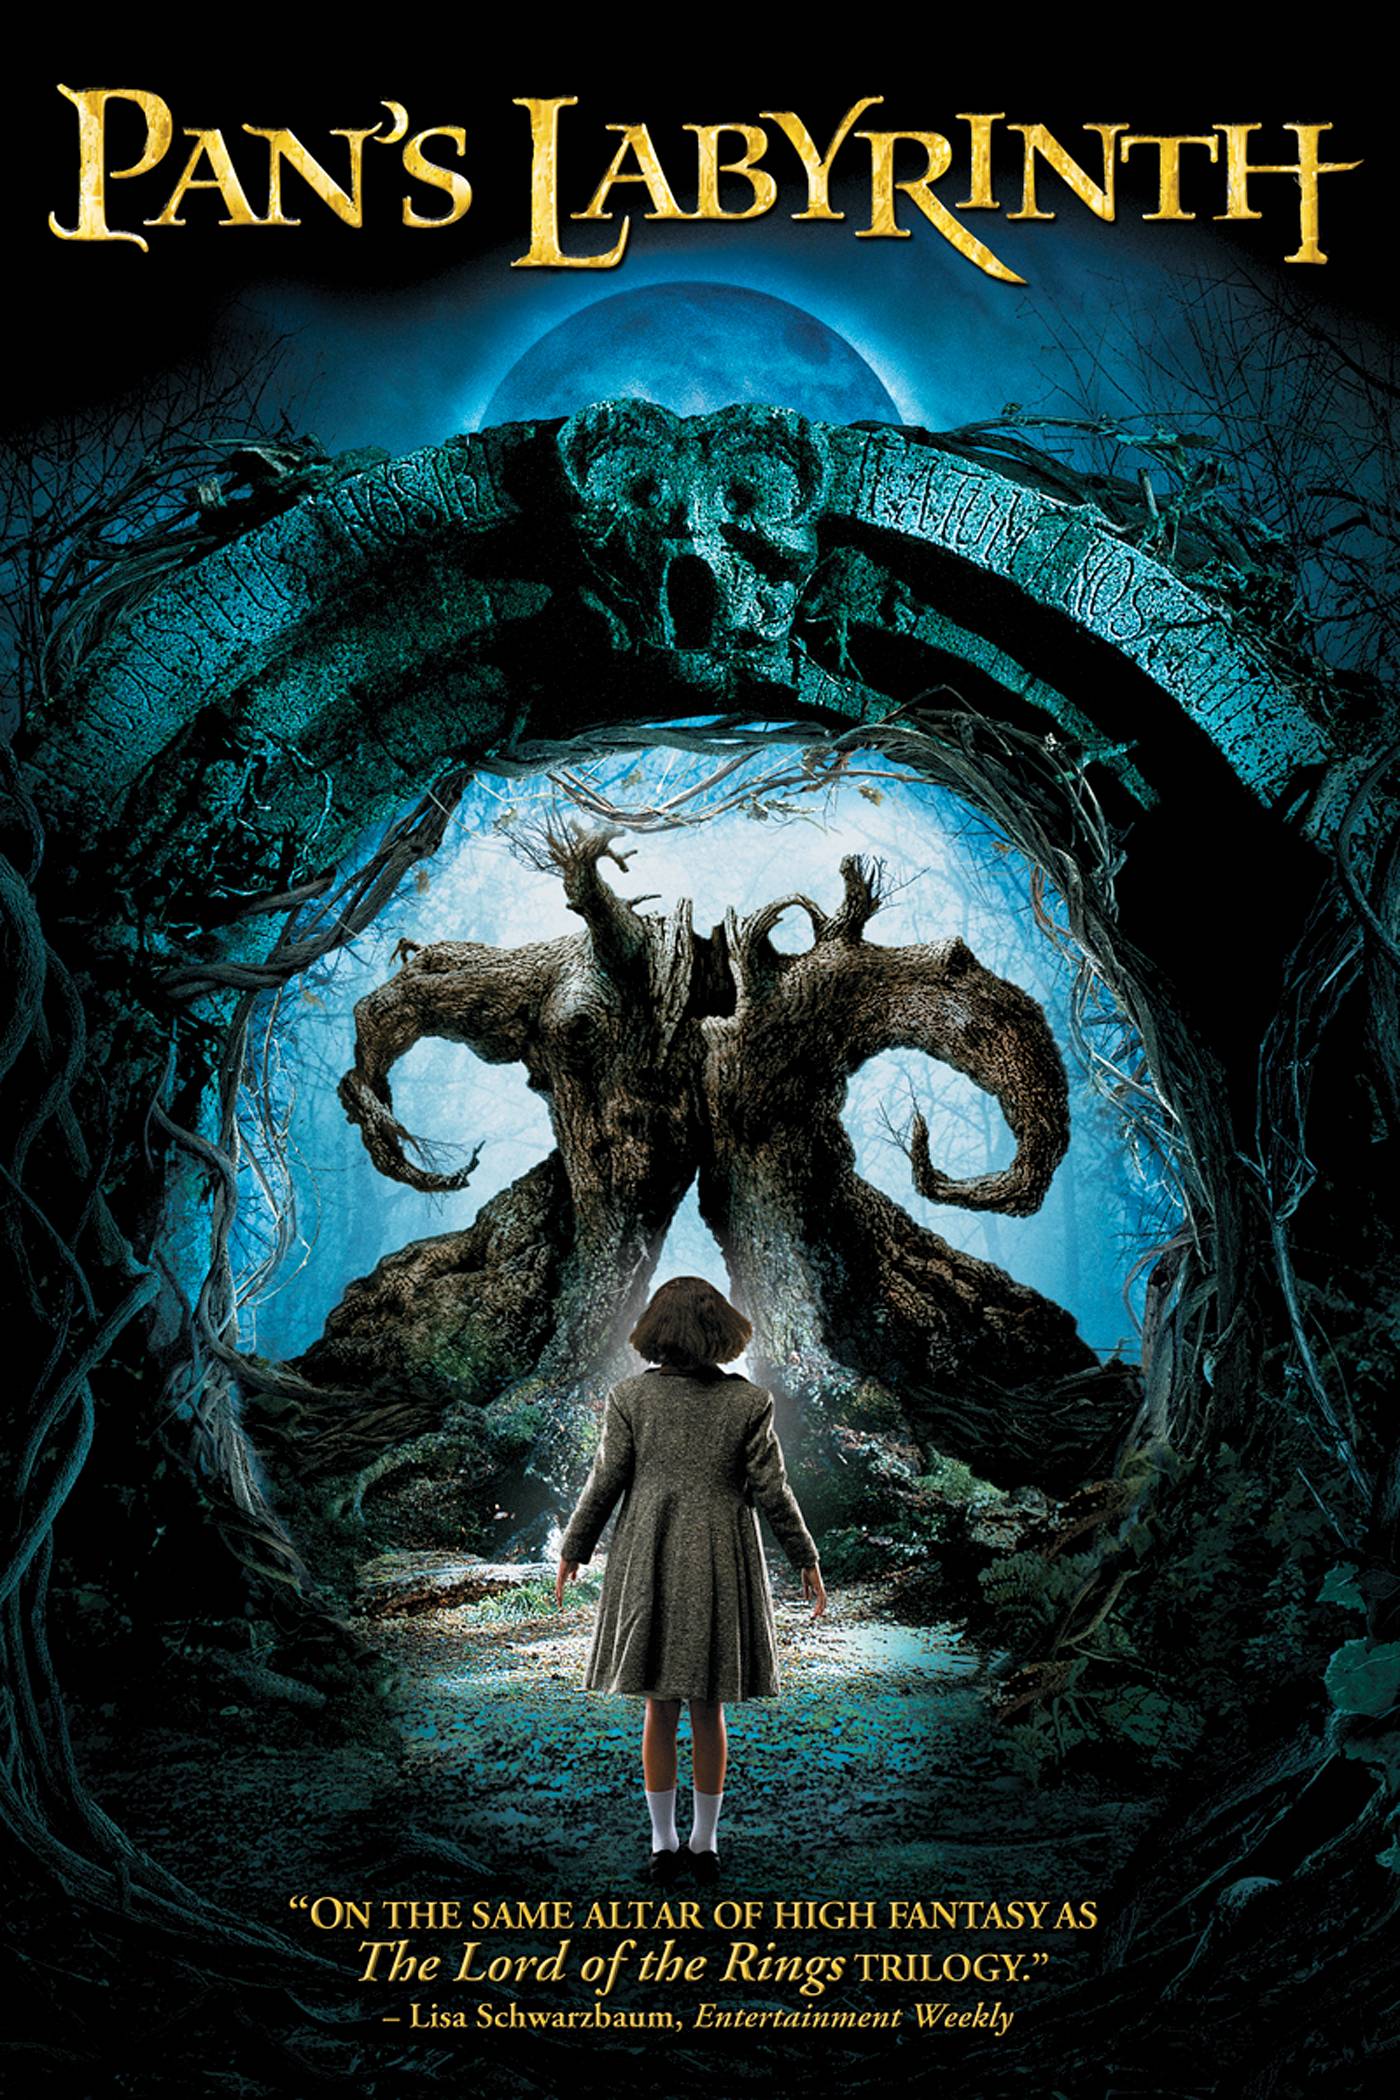 Five things you may not know about Pan's Labyrinth